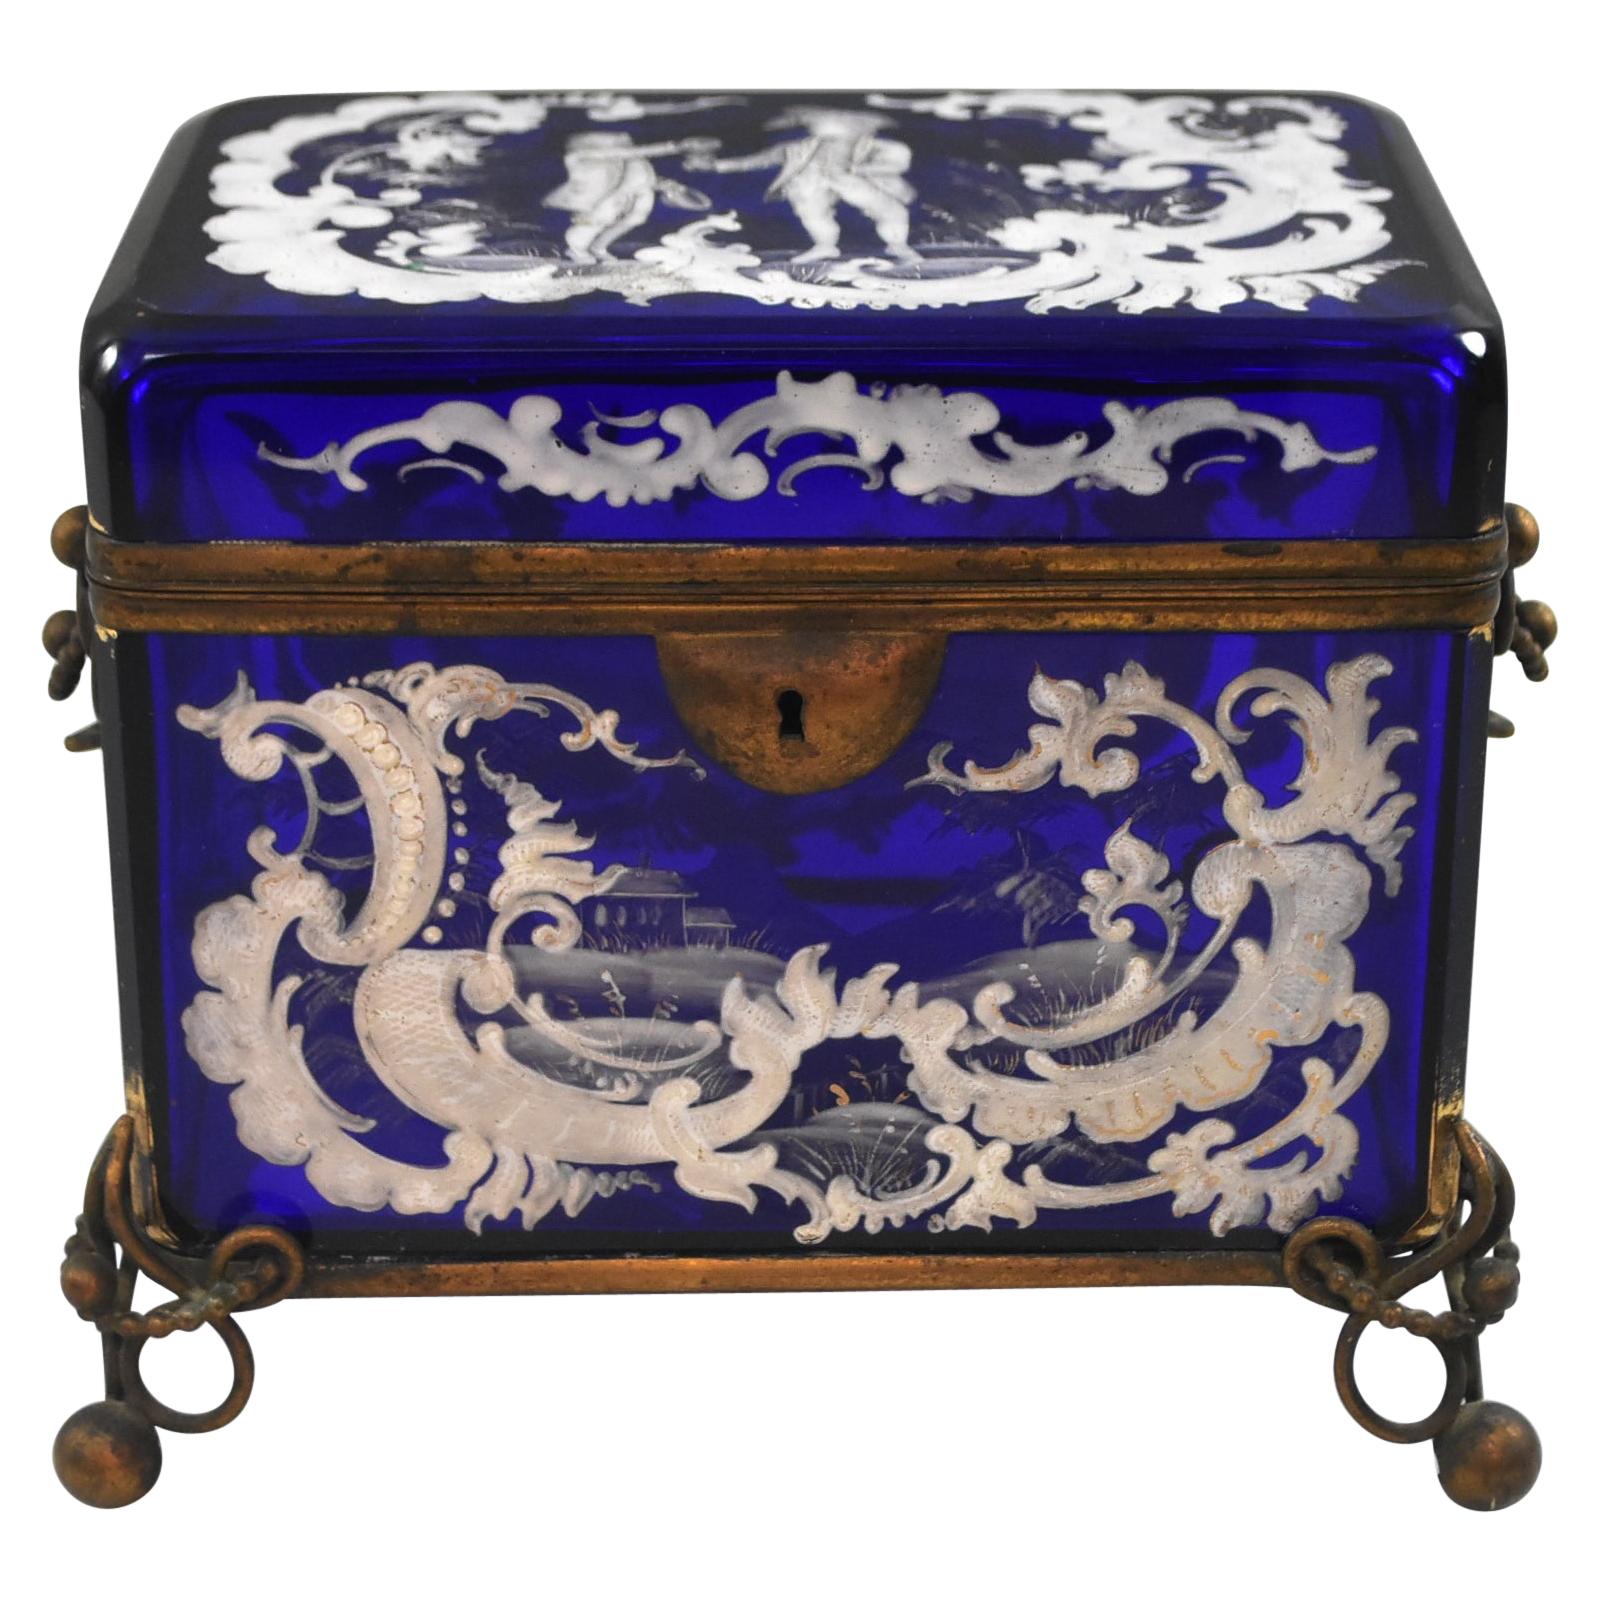 Victorian Mary Gregory Cobalt Blue Jewelry Casket